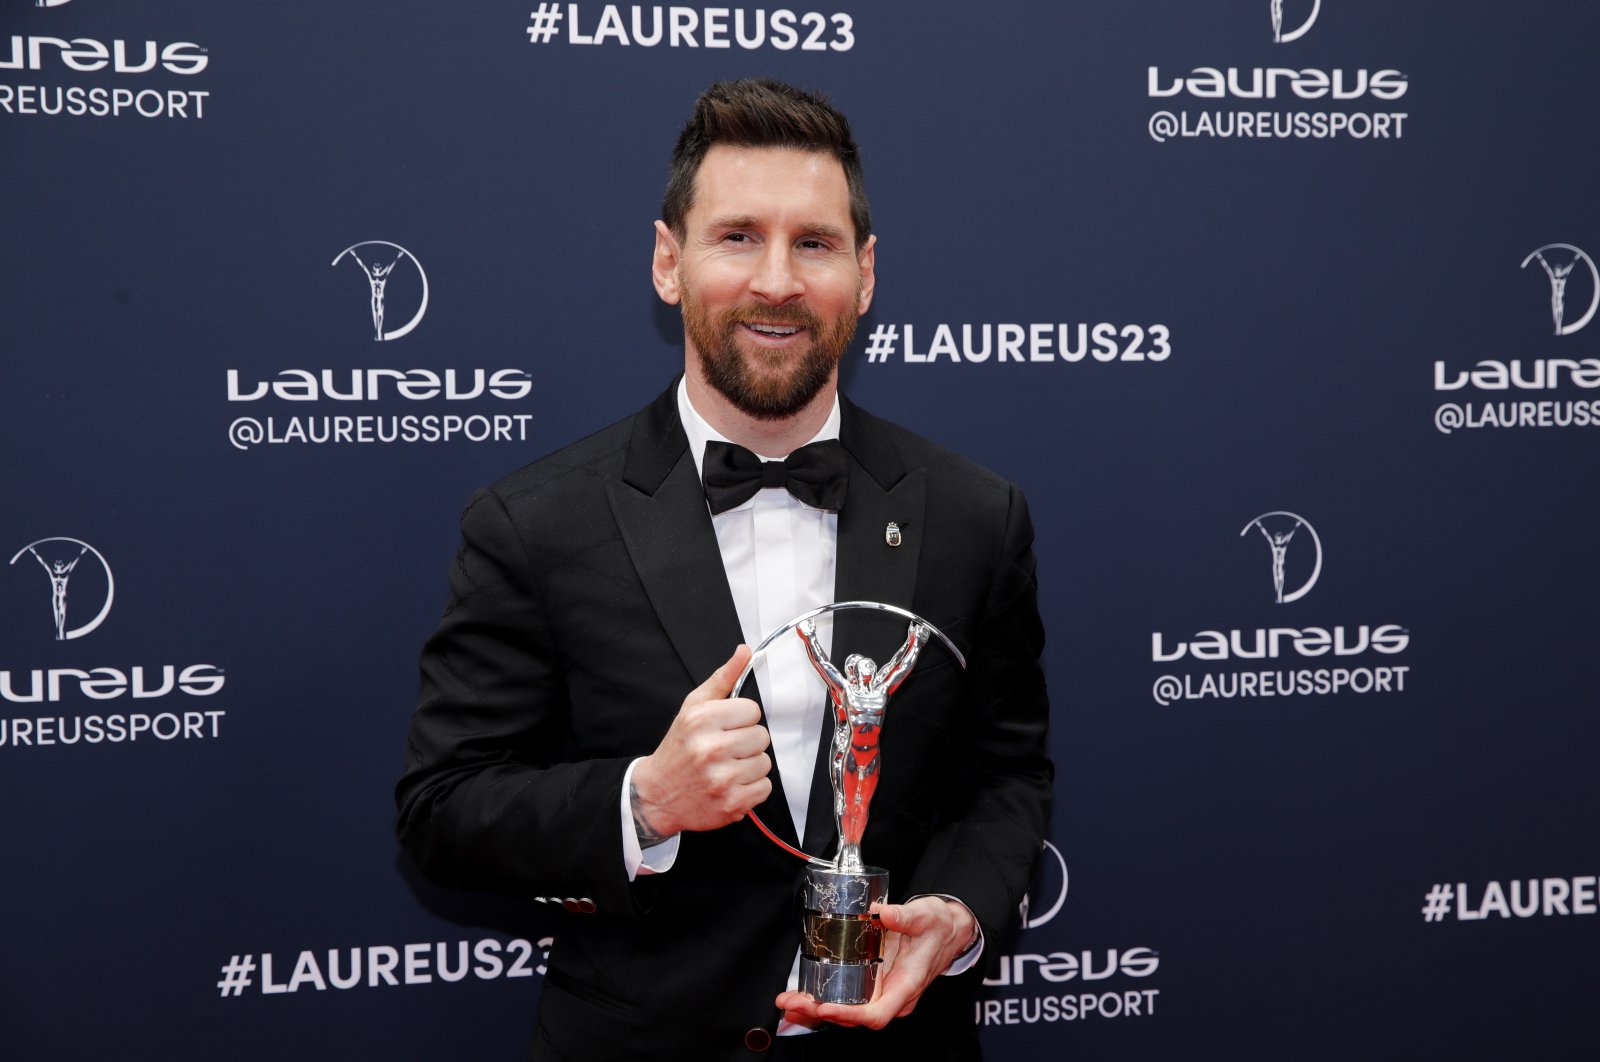 Lionel Messi poses with a Laureus World Sportsman of the Year award during the 2023 Laureus World Sports Awards, Paris, France, May 8, 2023. (EPA Photo)